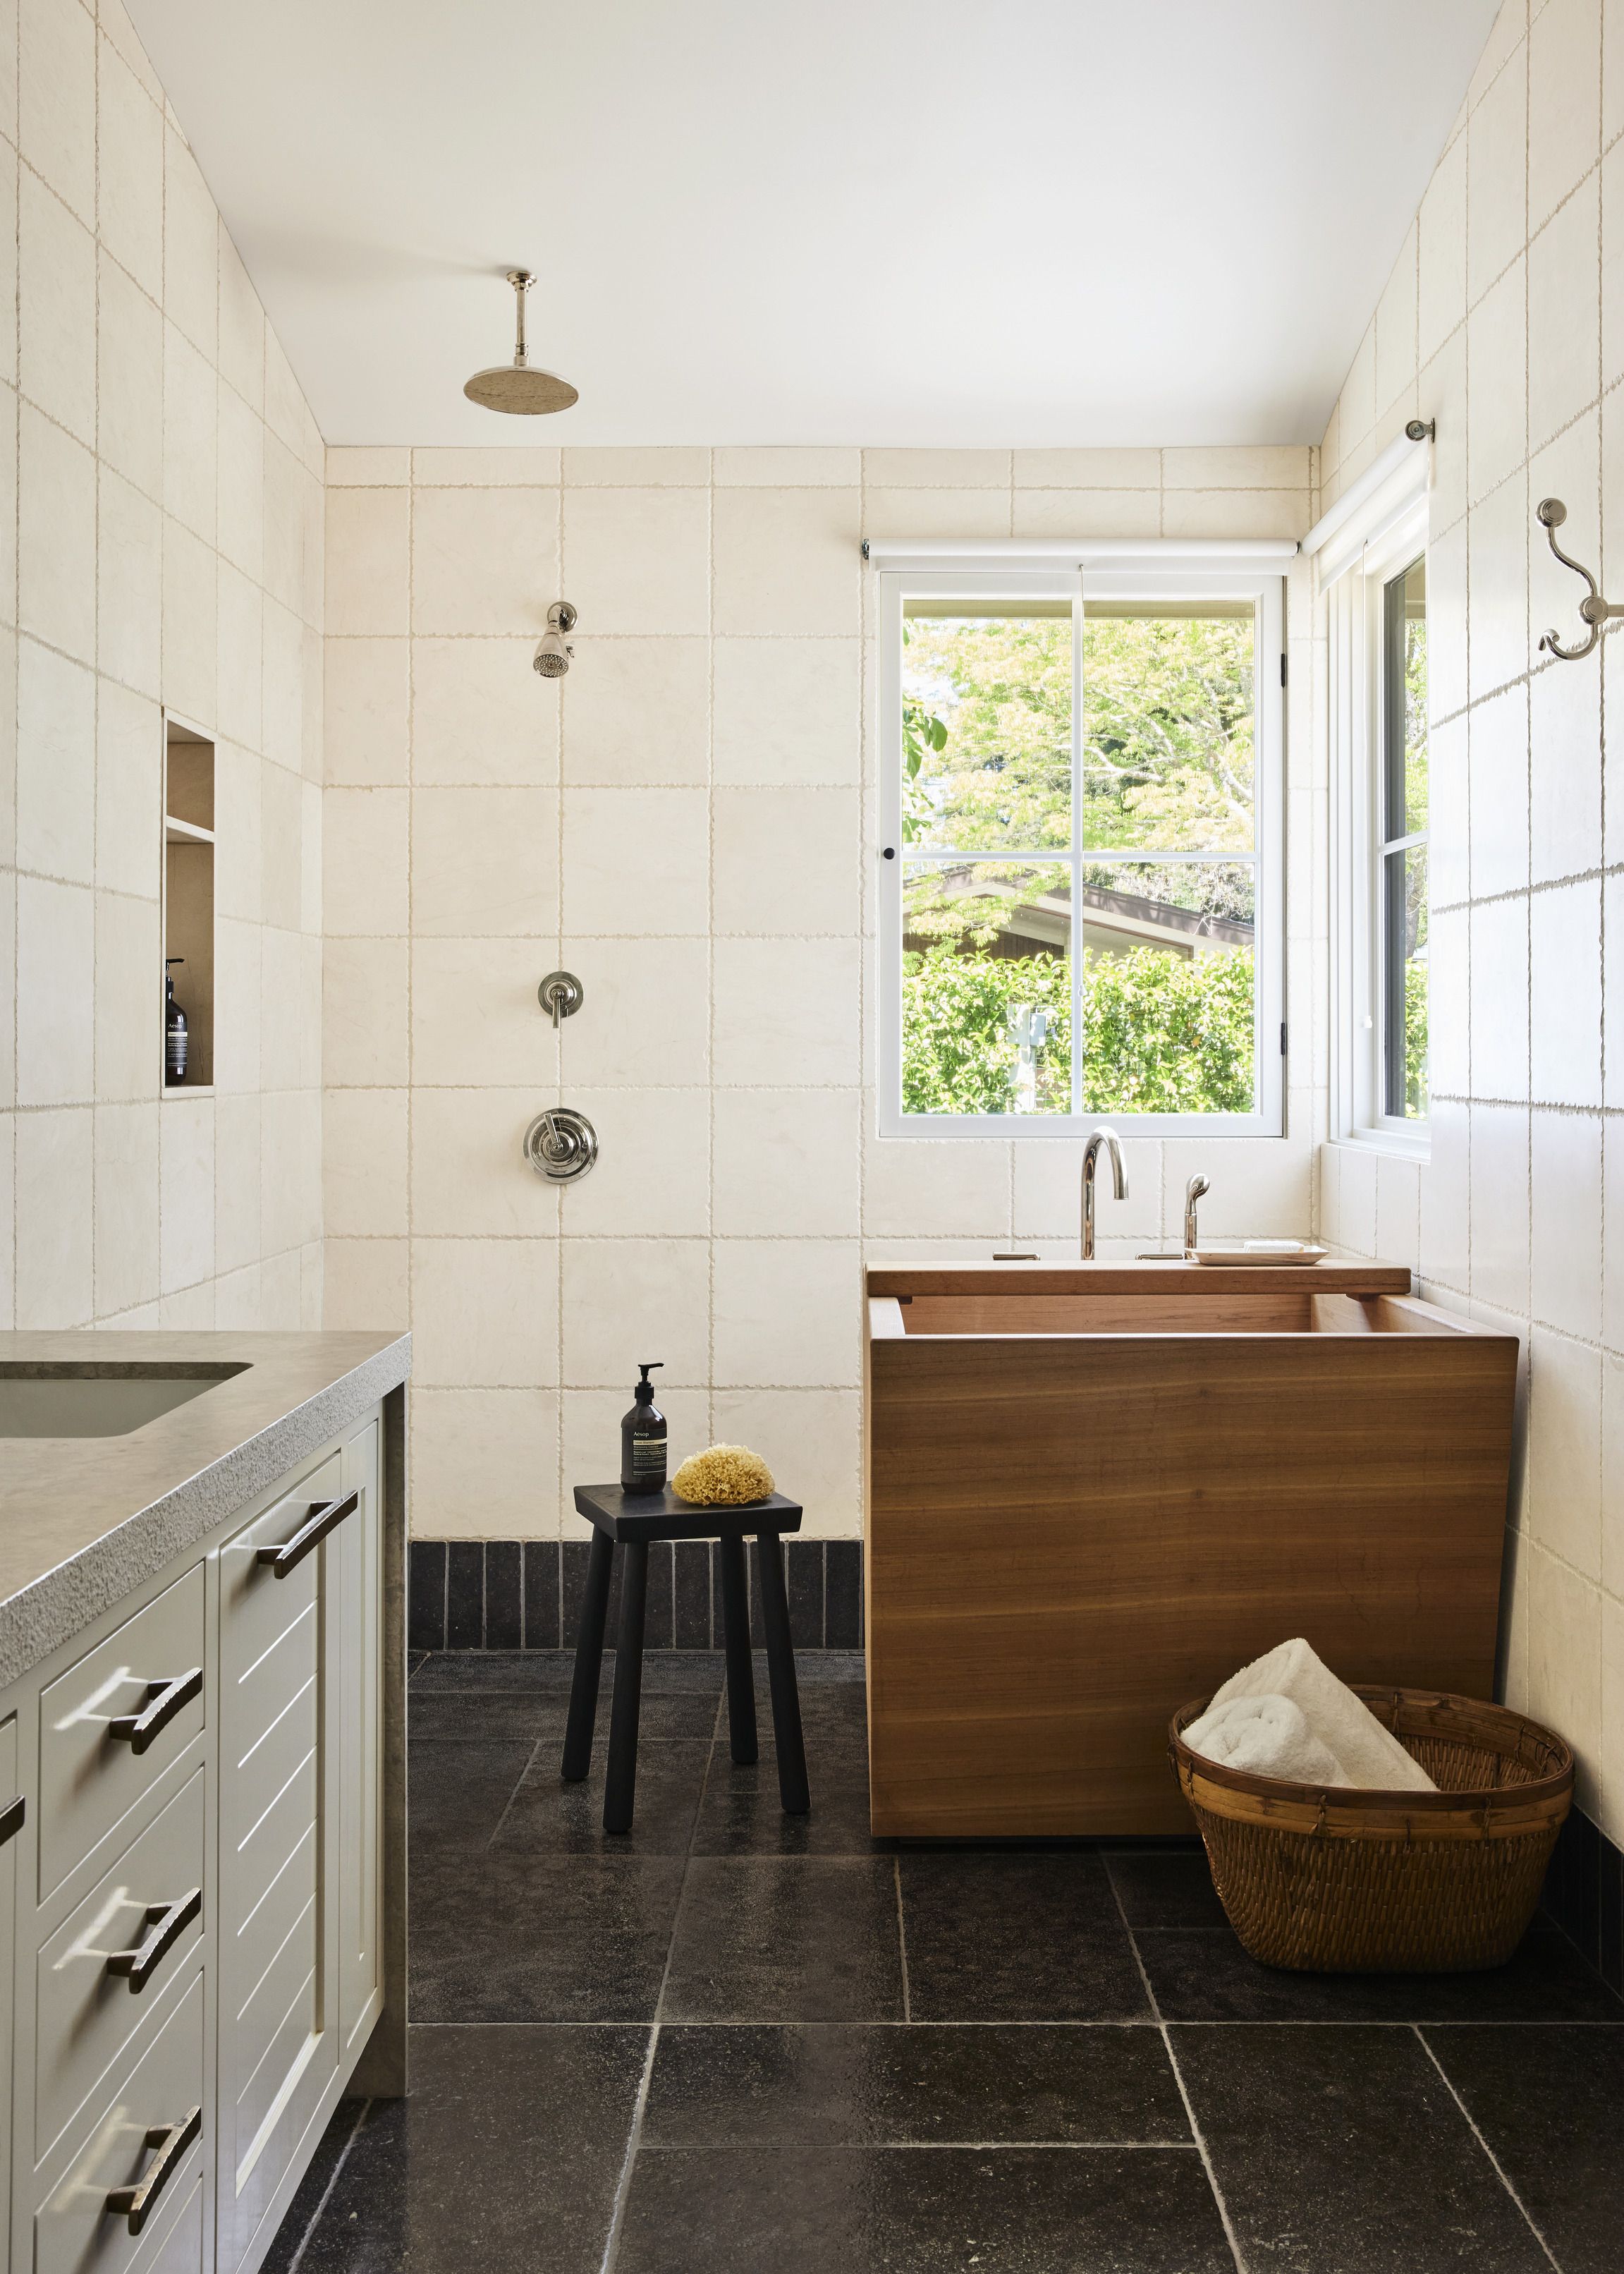 Give Your Bathroom The Spa Feeling It Deserves